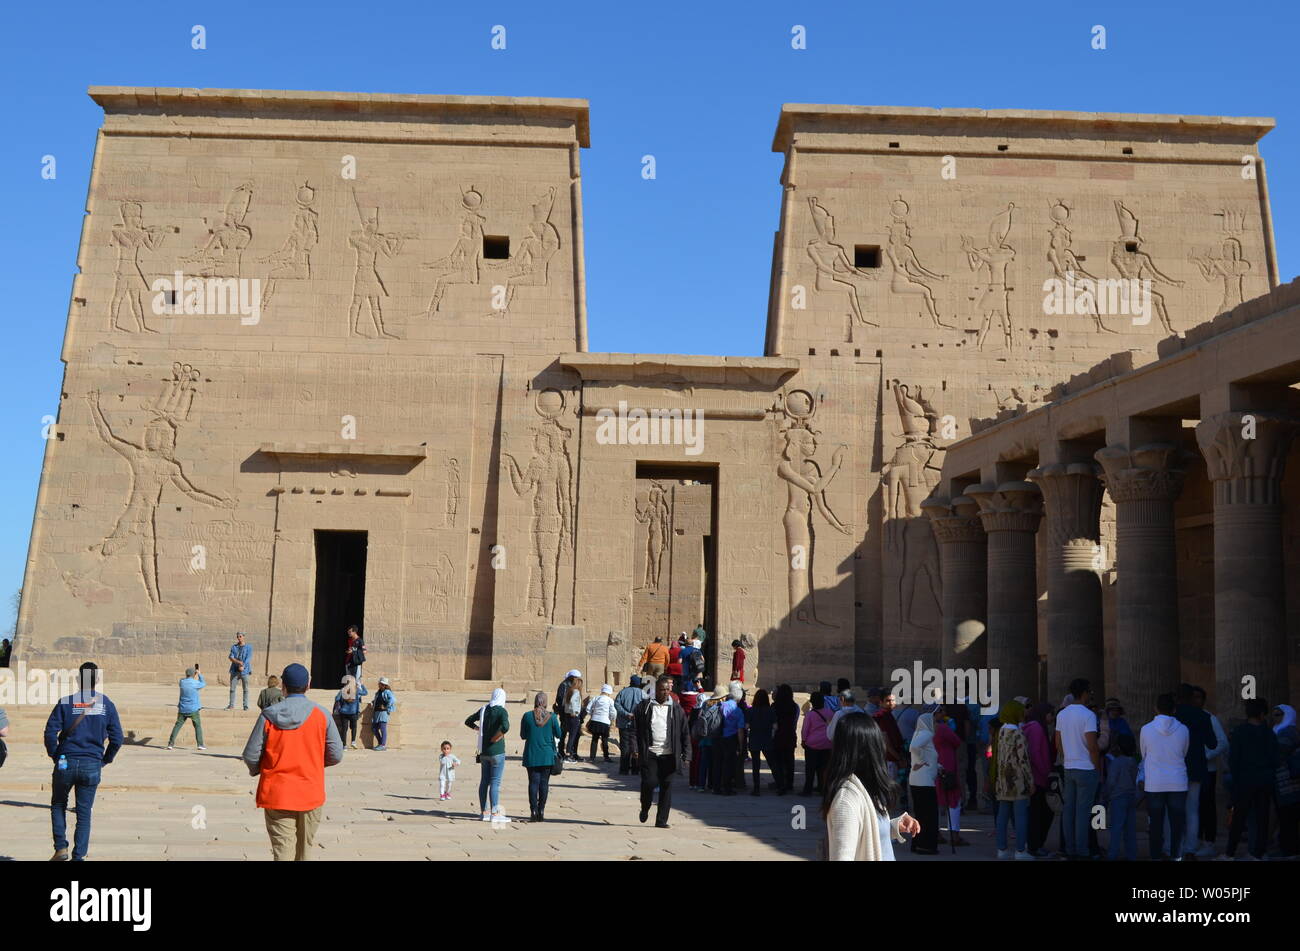 Temple of Philae, Egypt, Entrance and Columns Stock Photo